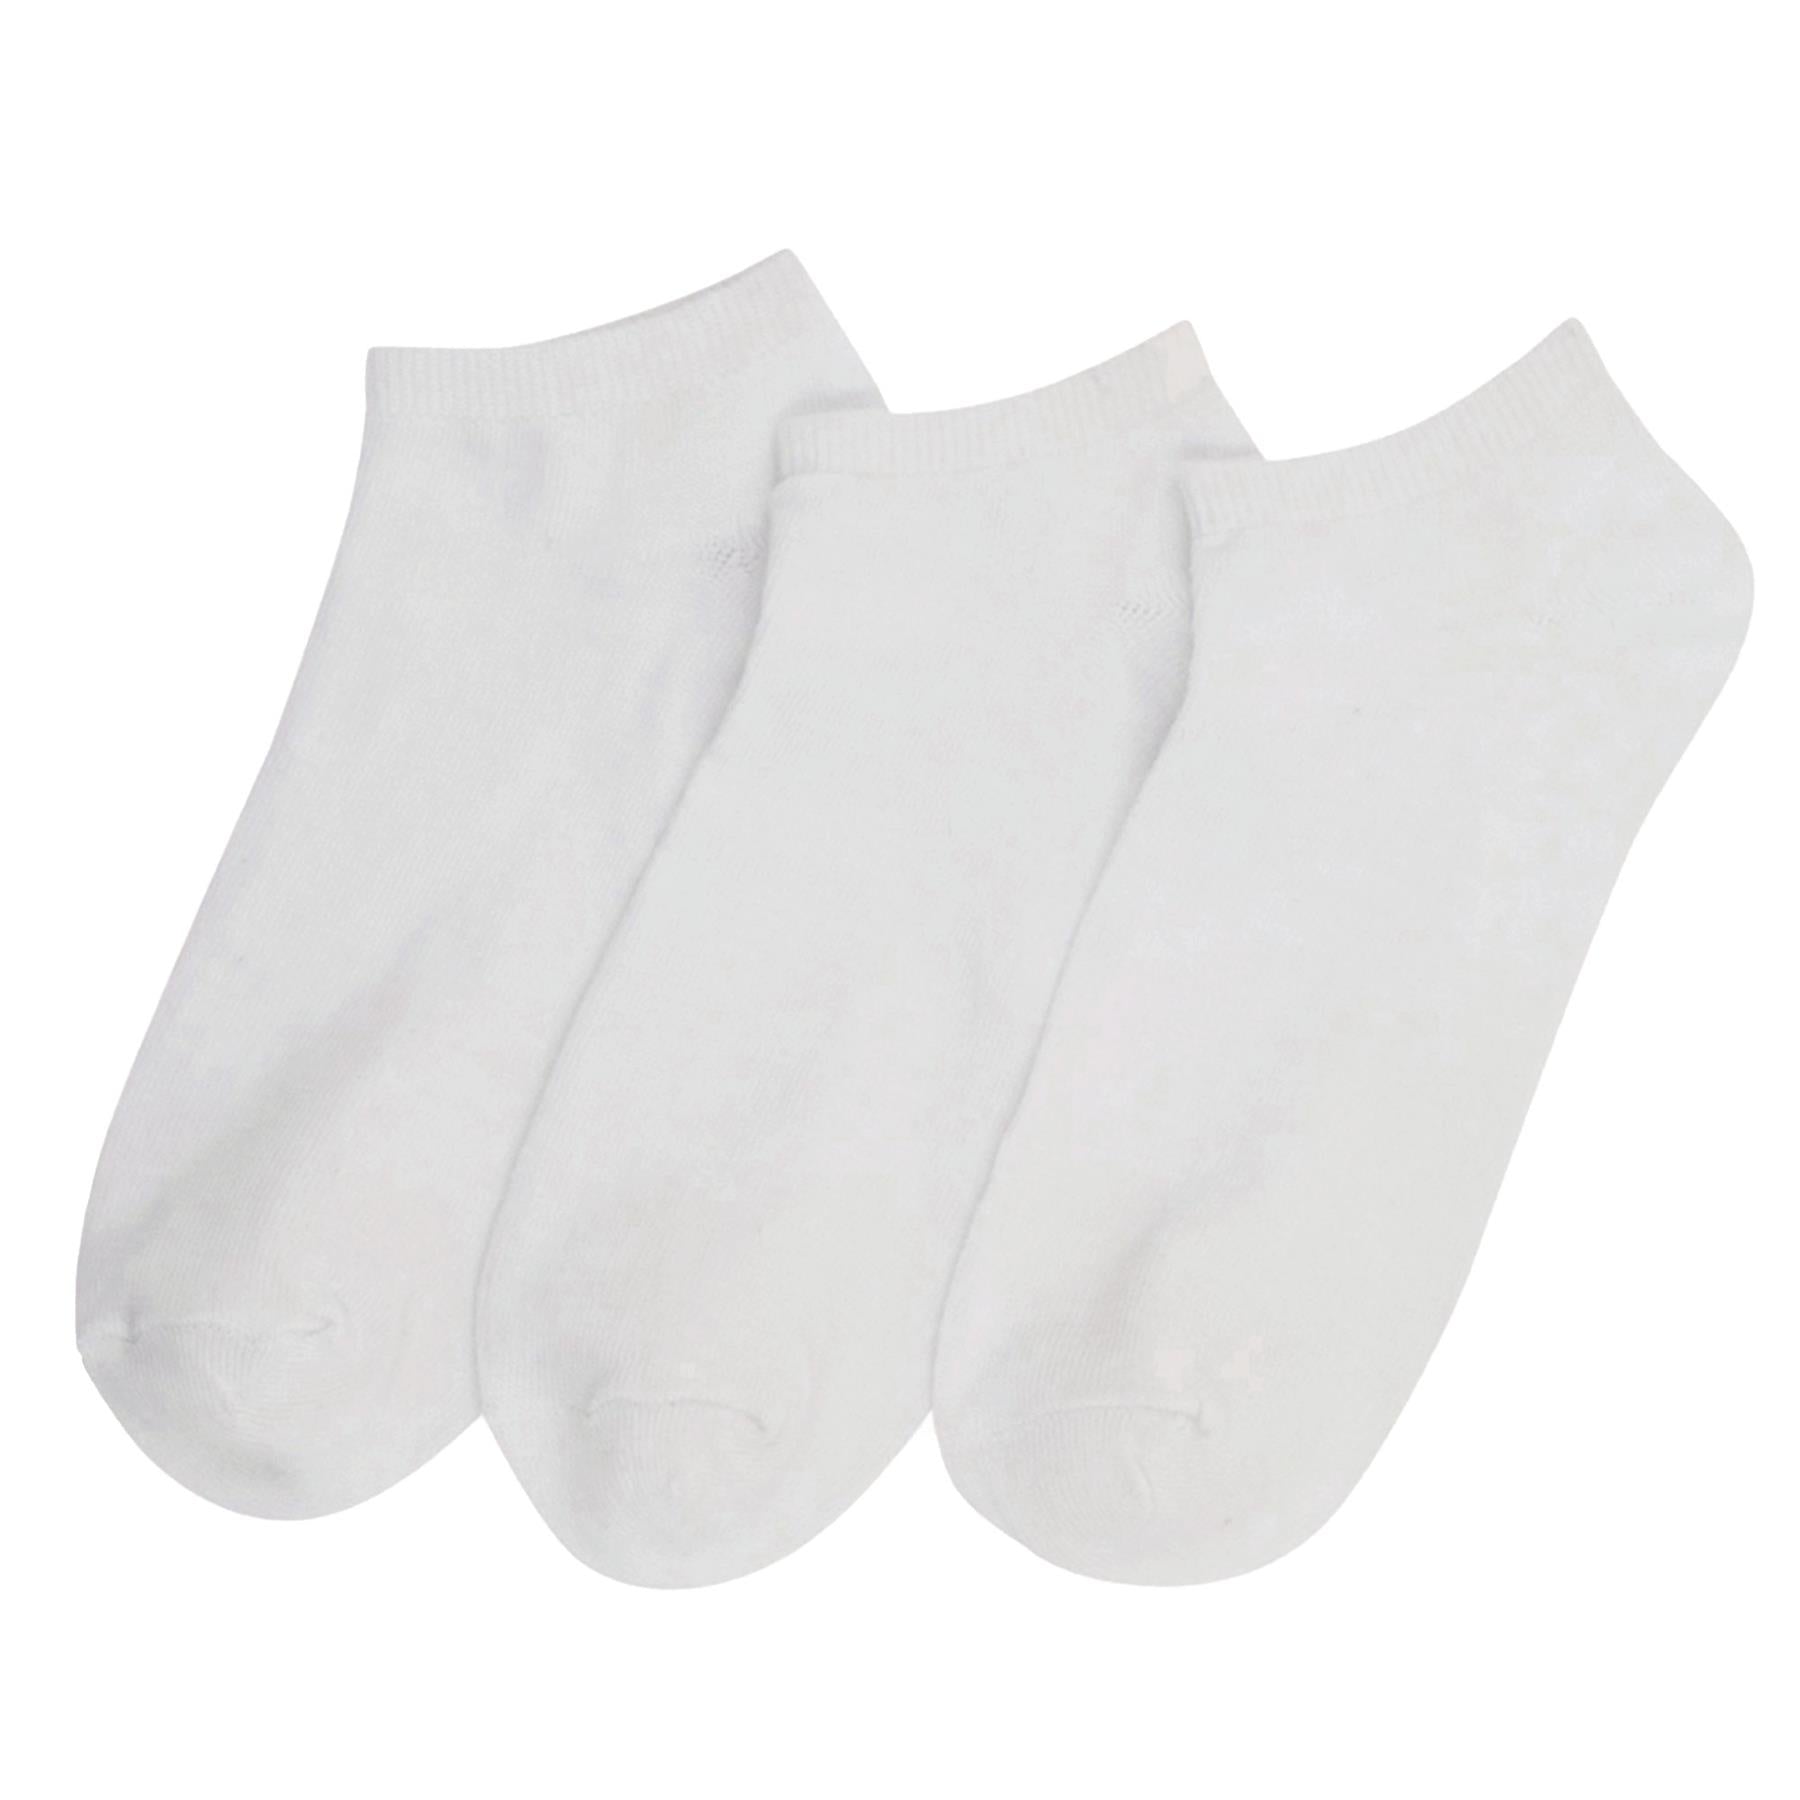 A2Z Ladies Socks Plain Ankle Trainer Low Cut Comfortable Woman Pack of 3 Socks